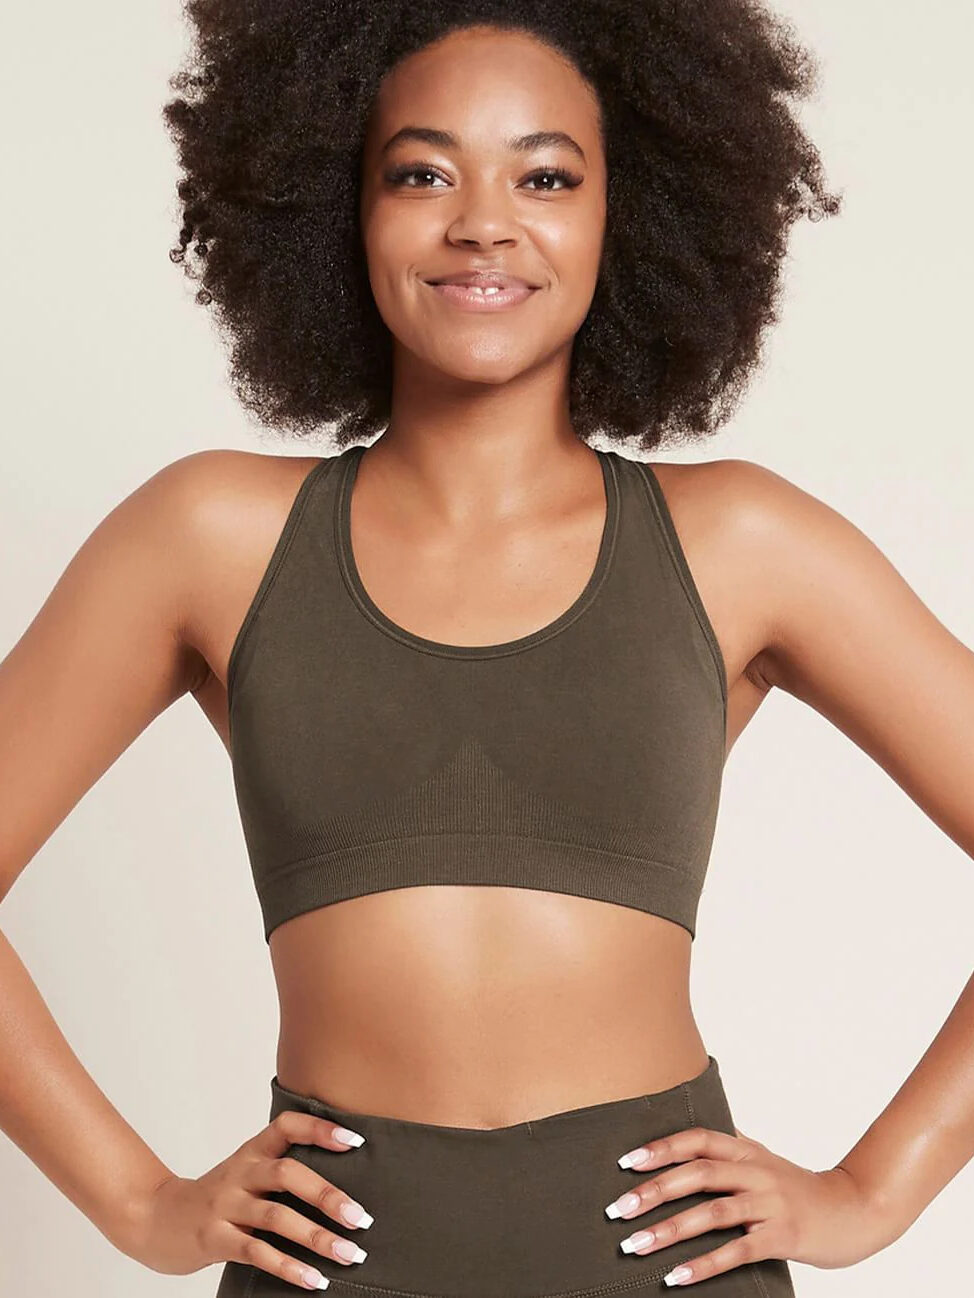 Check Out Boody's Zero-Waste Bra - The Most Comfortable Bralette